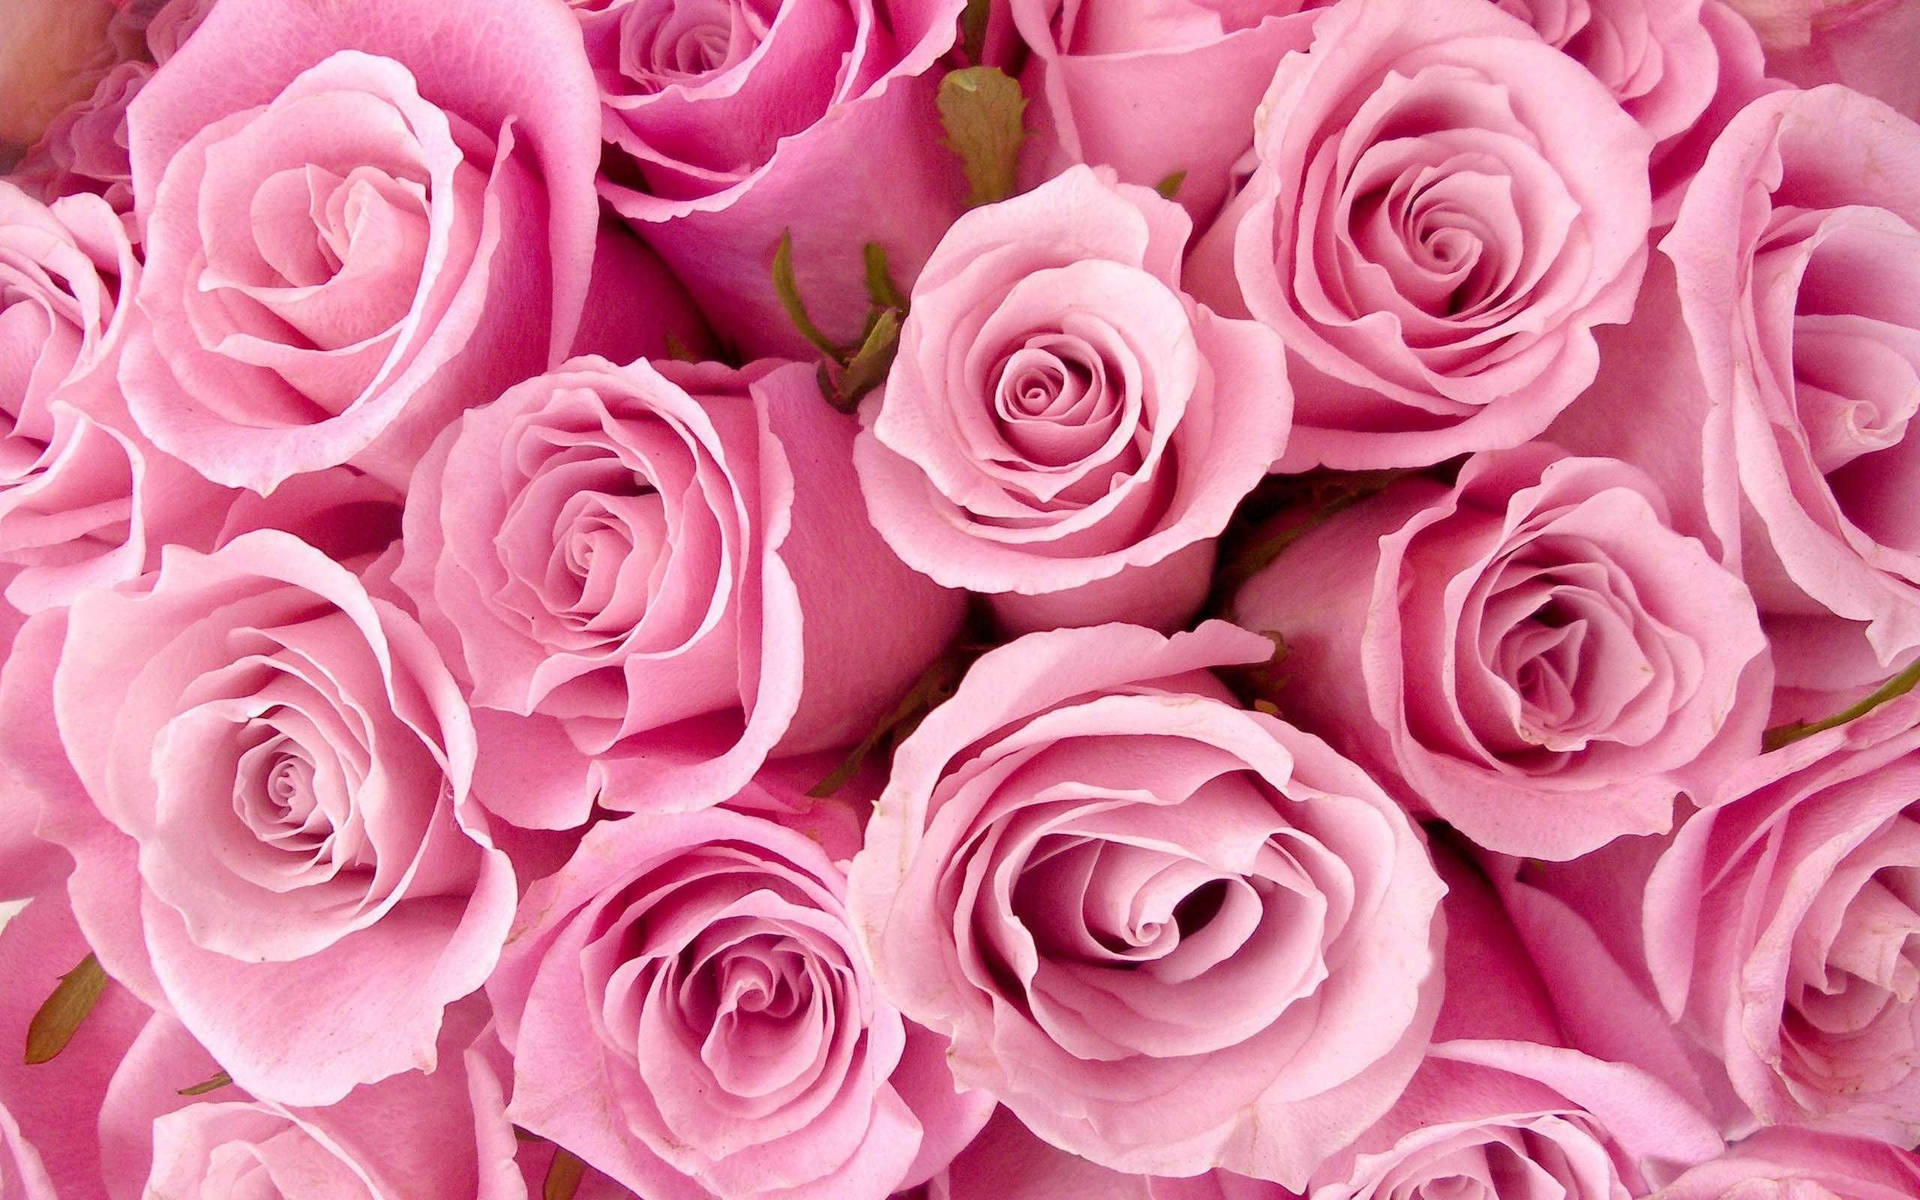 Aesthetic Girly Bouquet Of Flowers Wallpaper